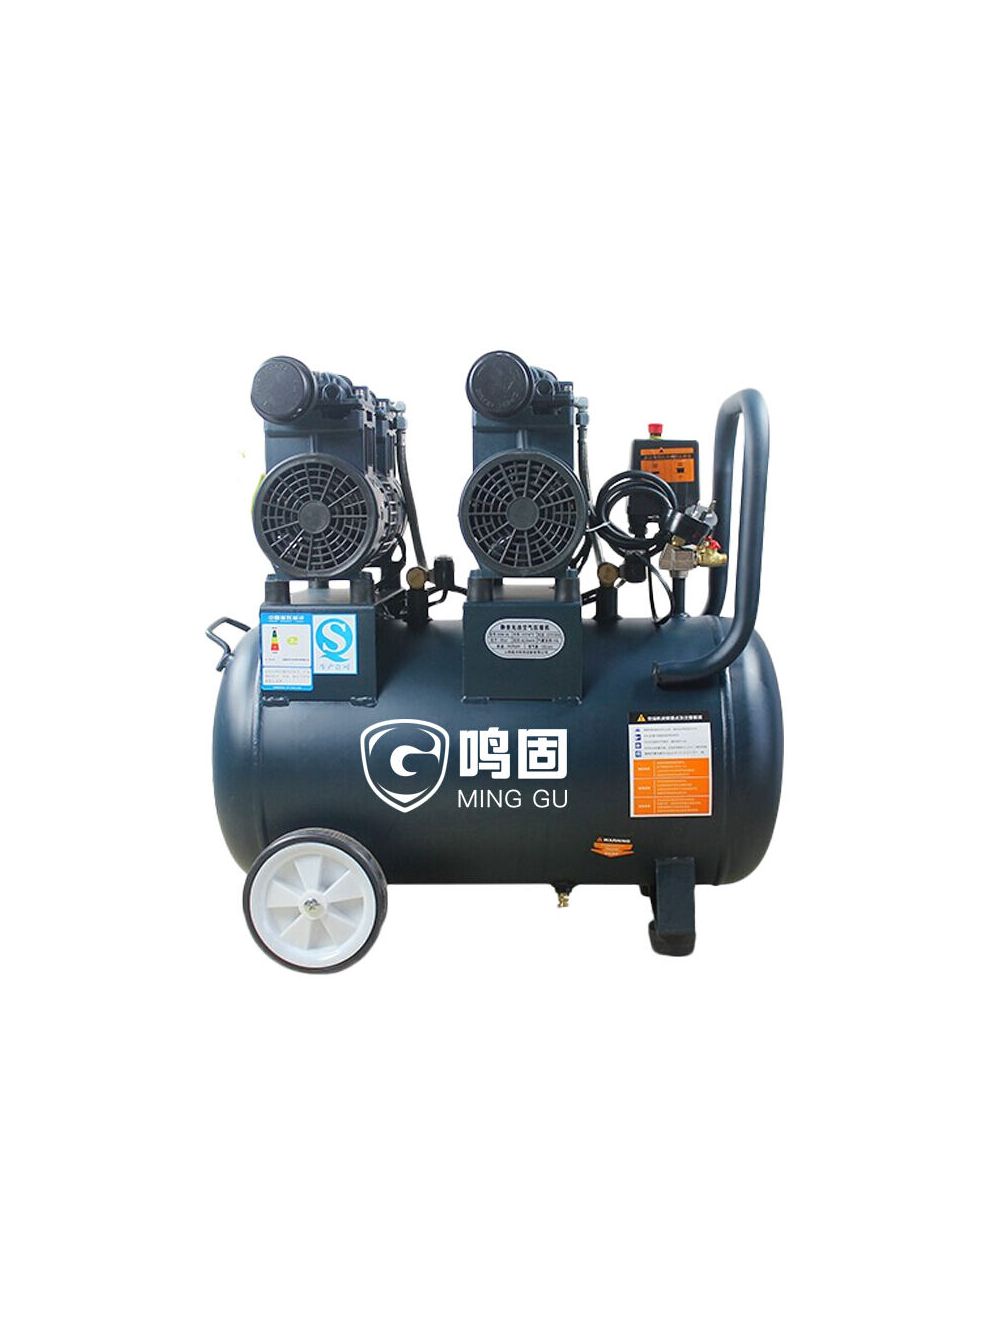 New In stock for sale, MING GU Air Compressor 850WX2-50L